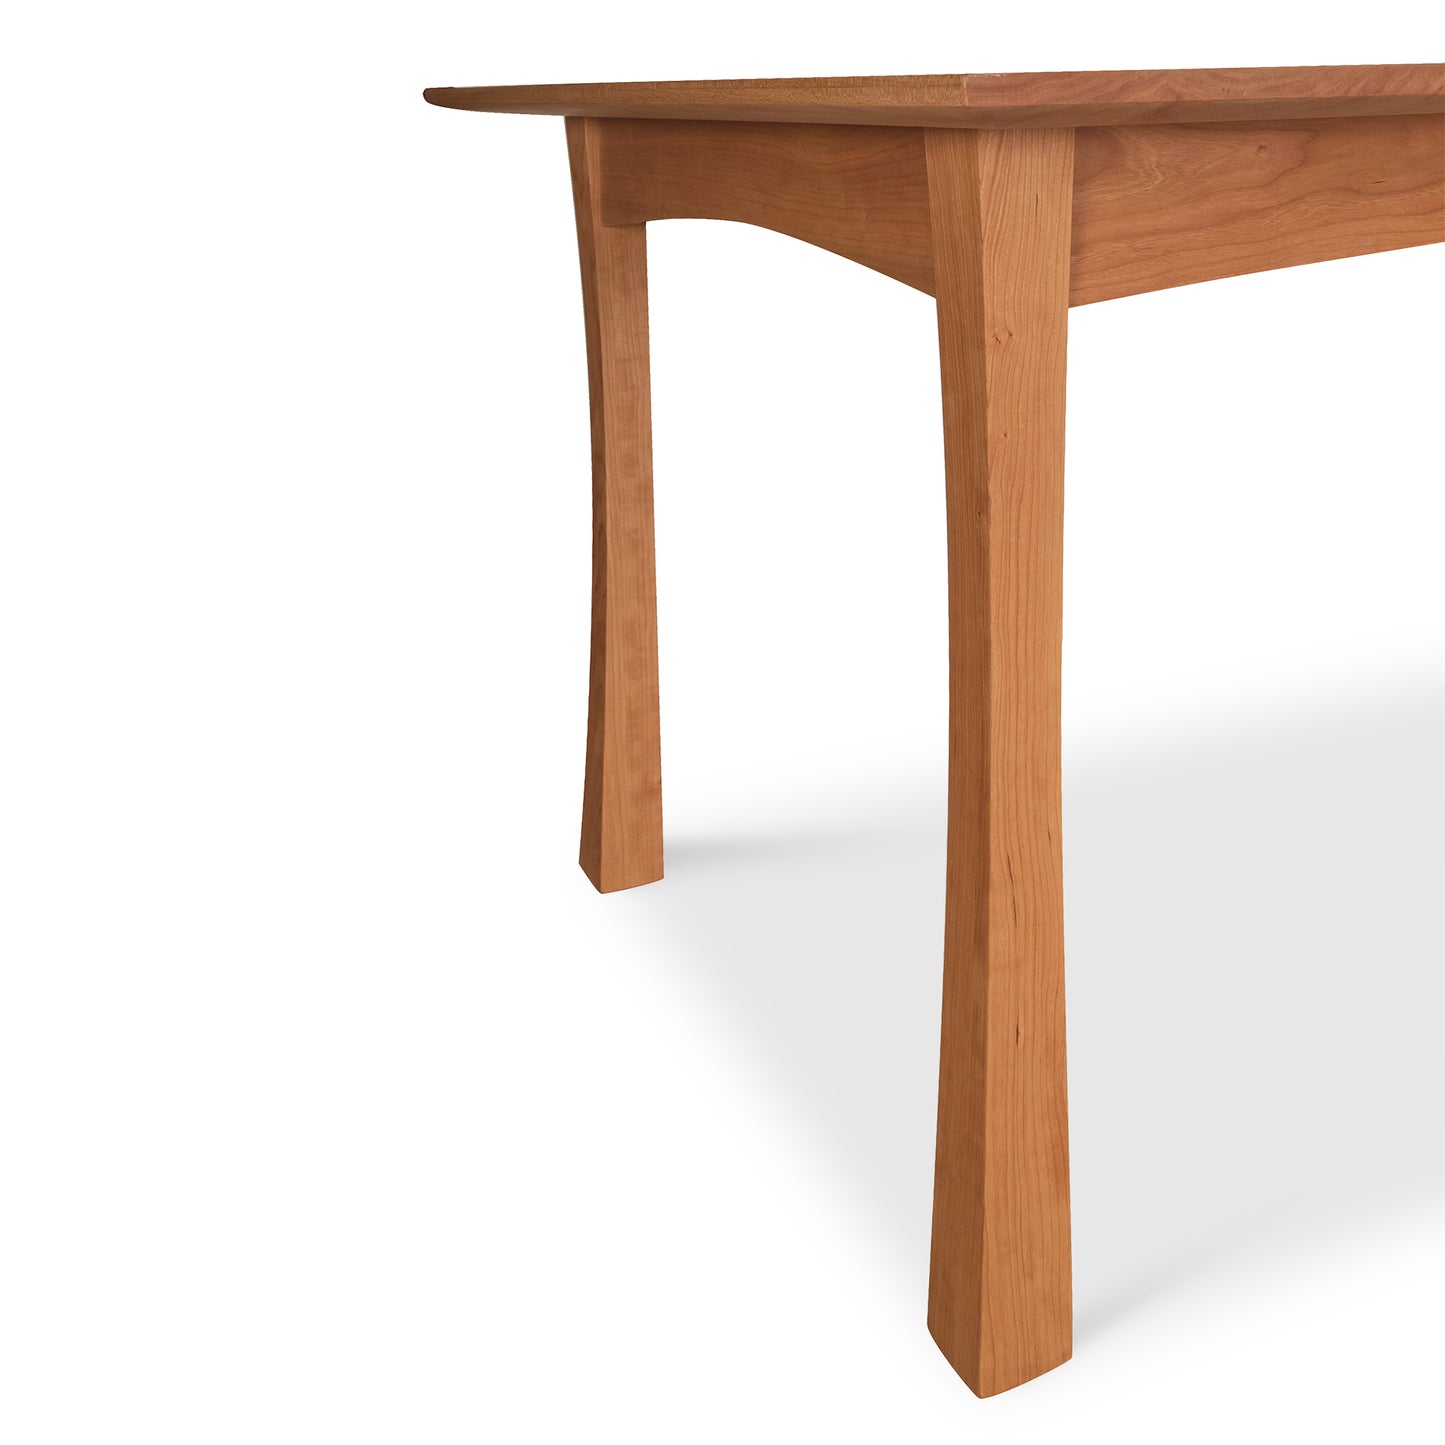 A Vermont Furniture Designs Contemporary Craftsman Solid Top Dining Table with one leg visible, shown in partial view against a white background.